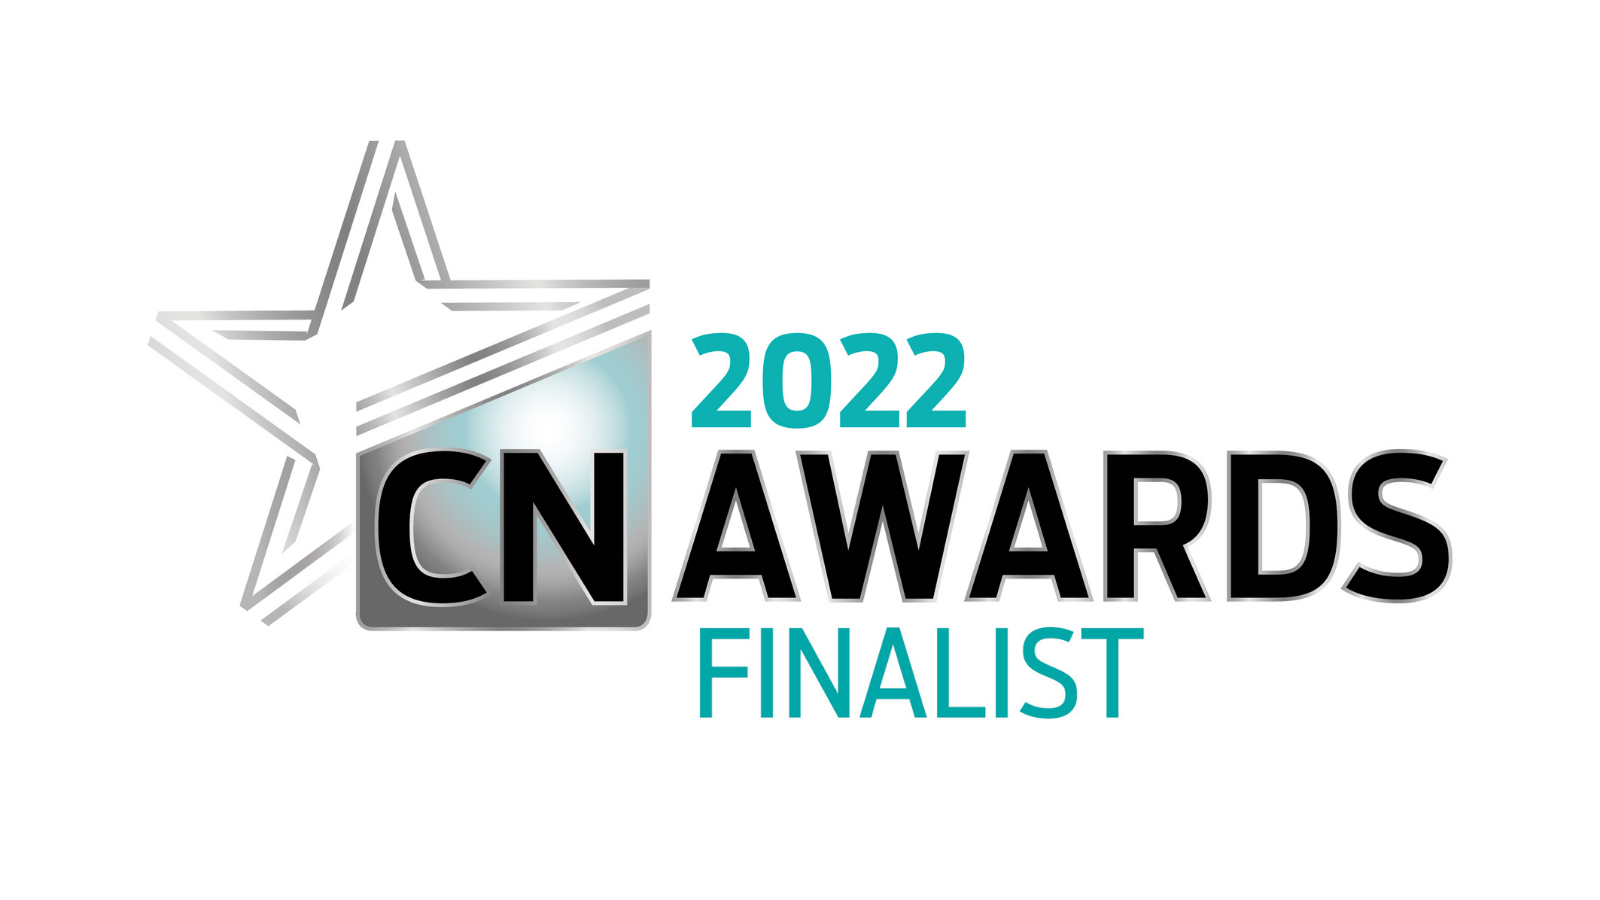 CNAwards finalists carnival place inndex mid group